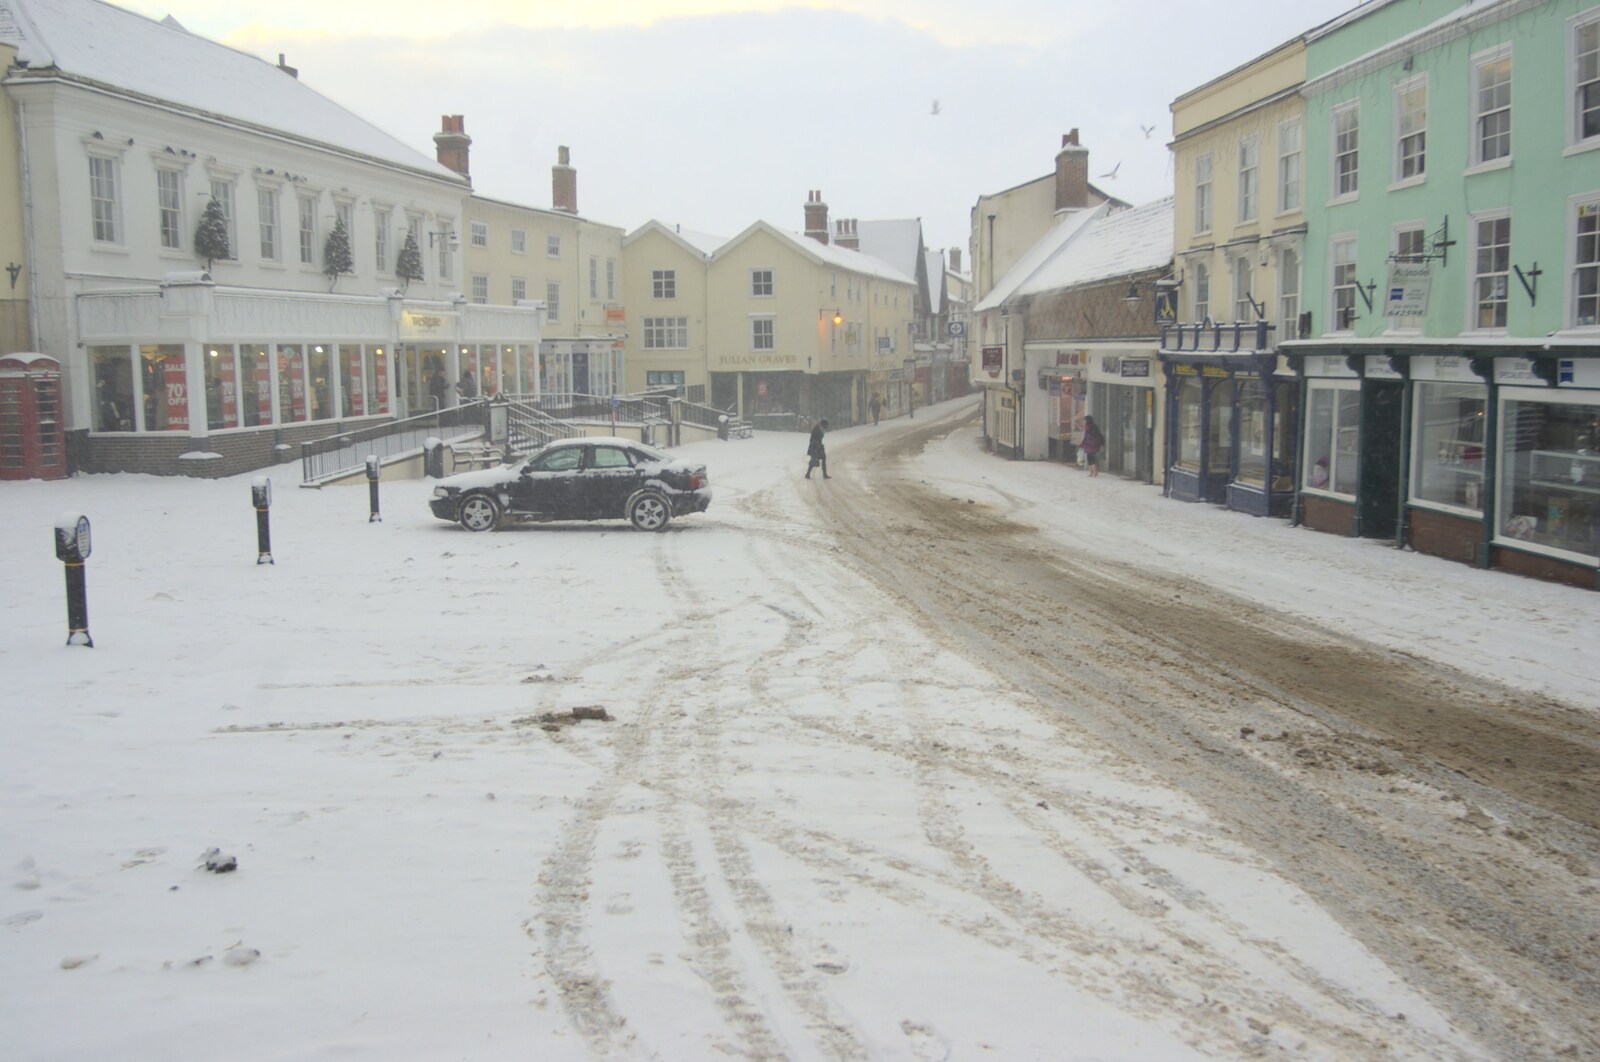 A Snowy Miscellany, Diss, Norfolk - 9th January 2010: A solitary soul on the Market Place